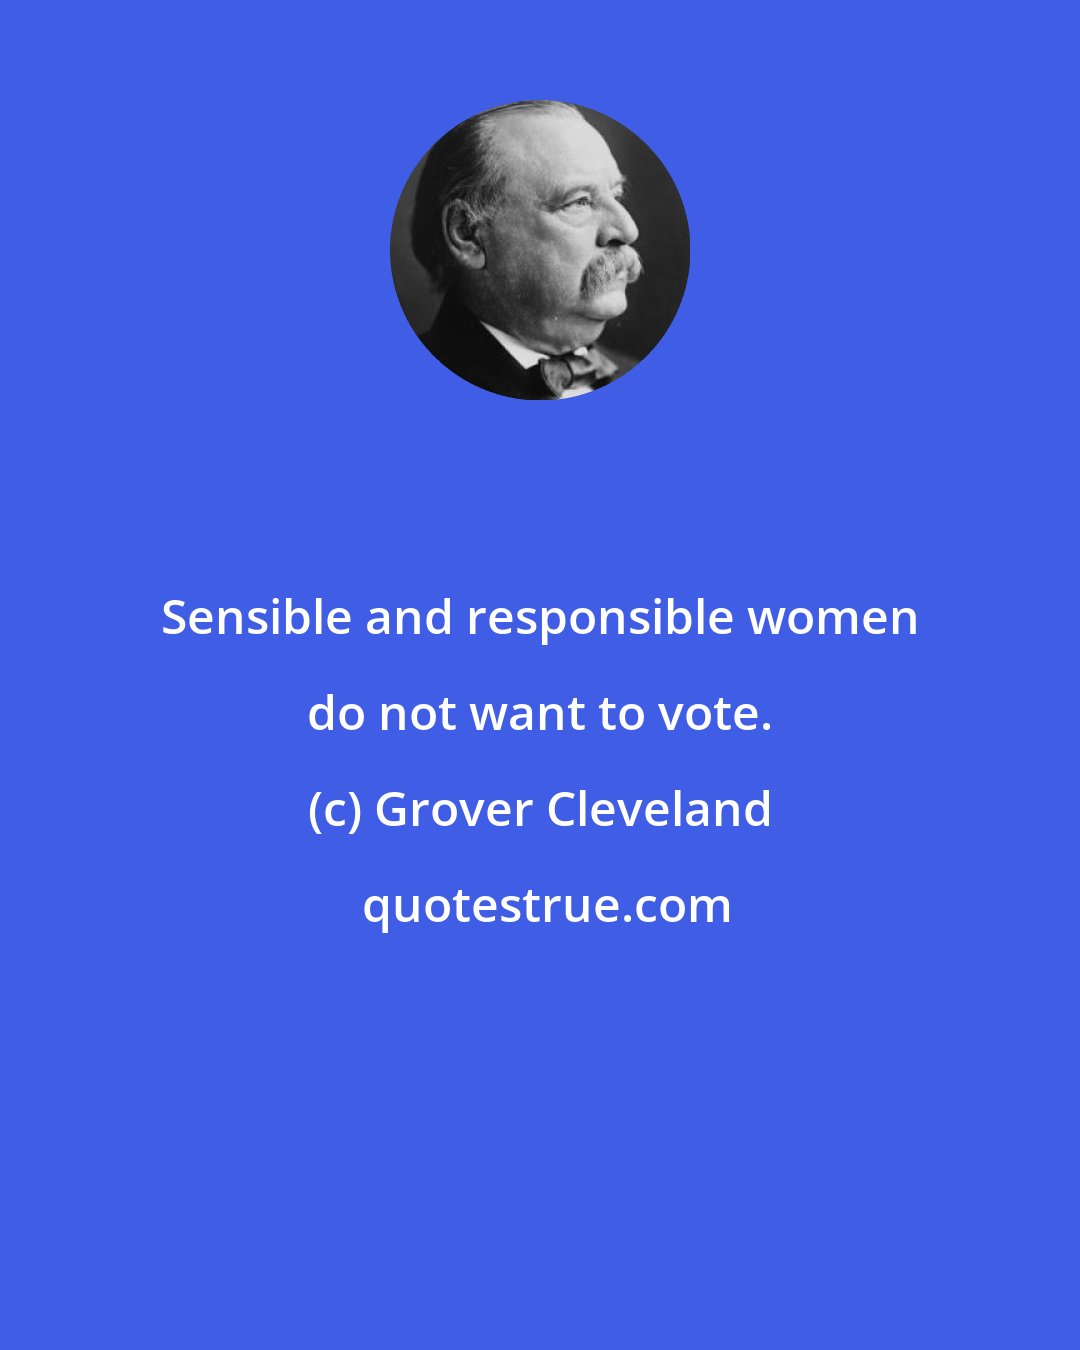 Grover Cleveland: Sensible and responsible women do not want to vote.